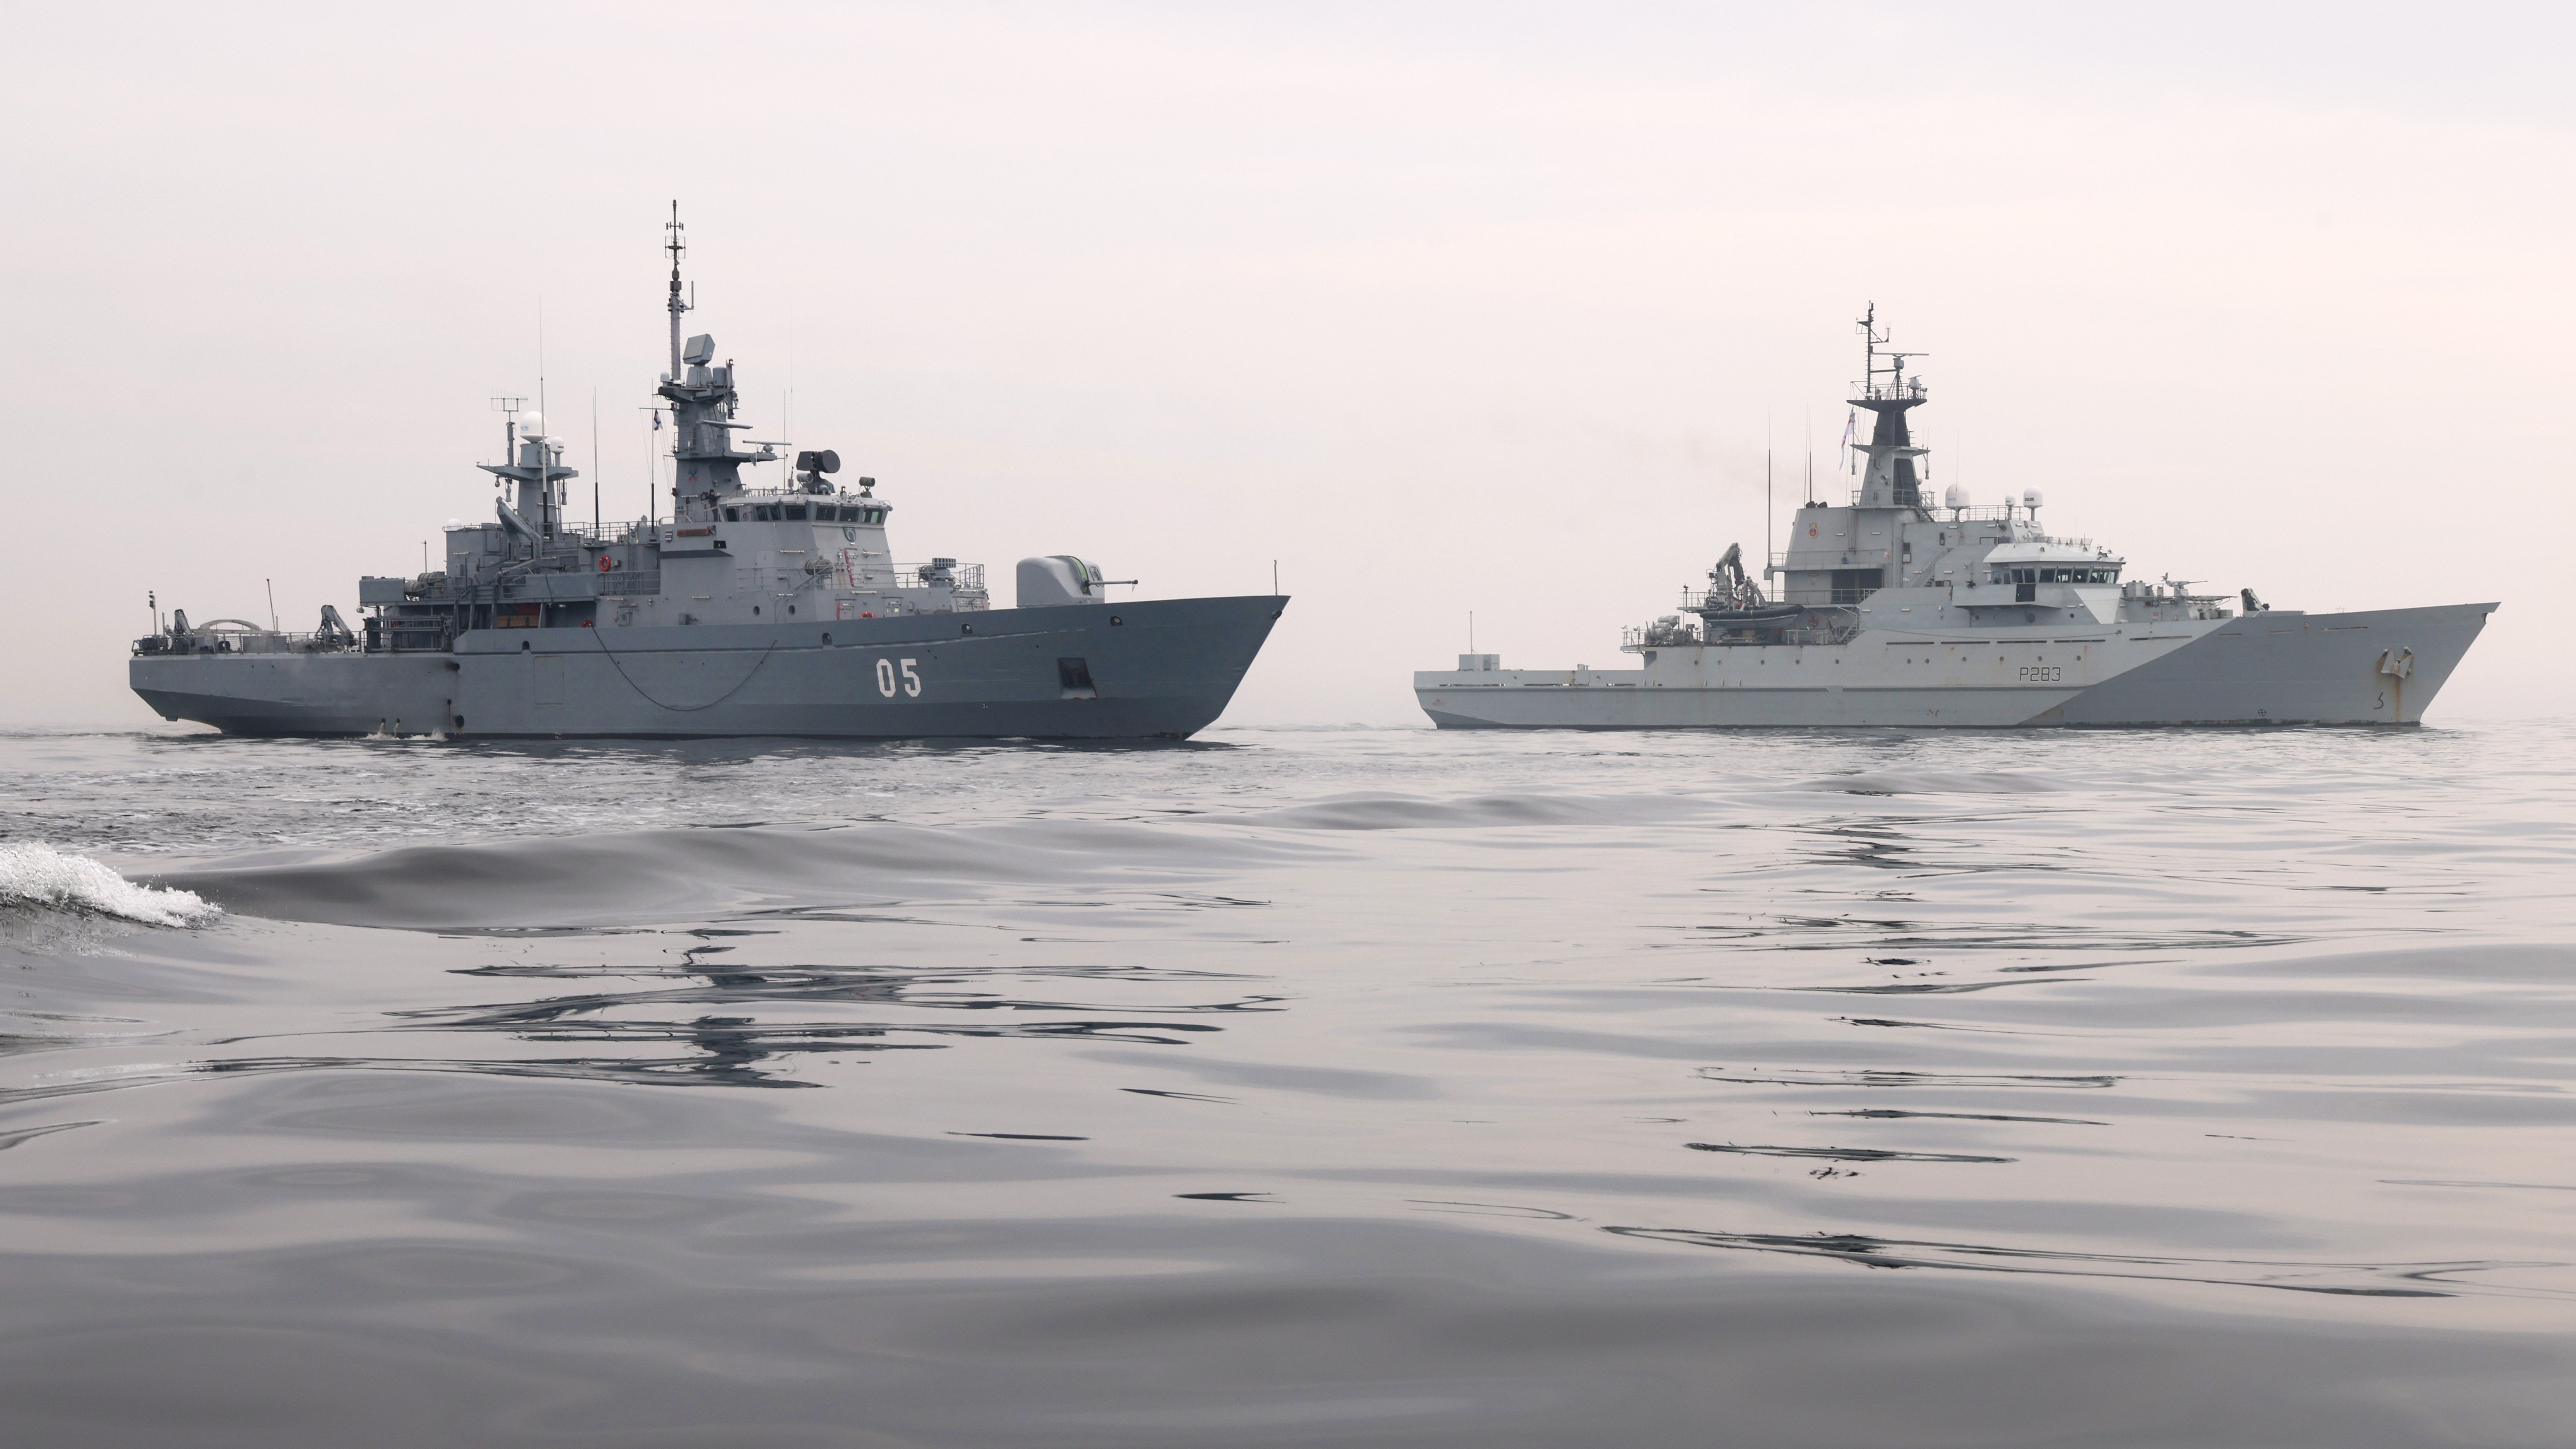 Patrol ship Mersey works with RAF in the Baltic